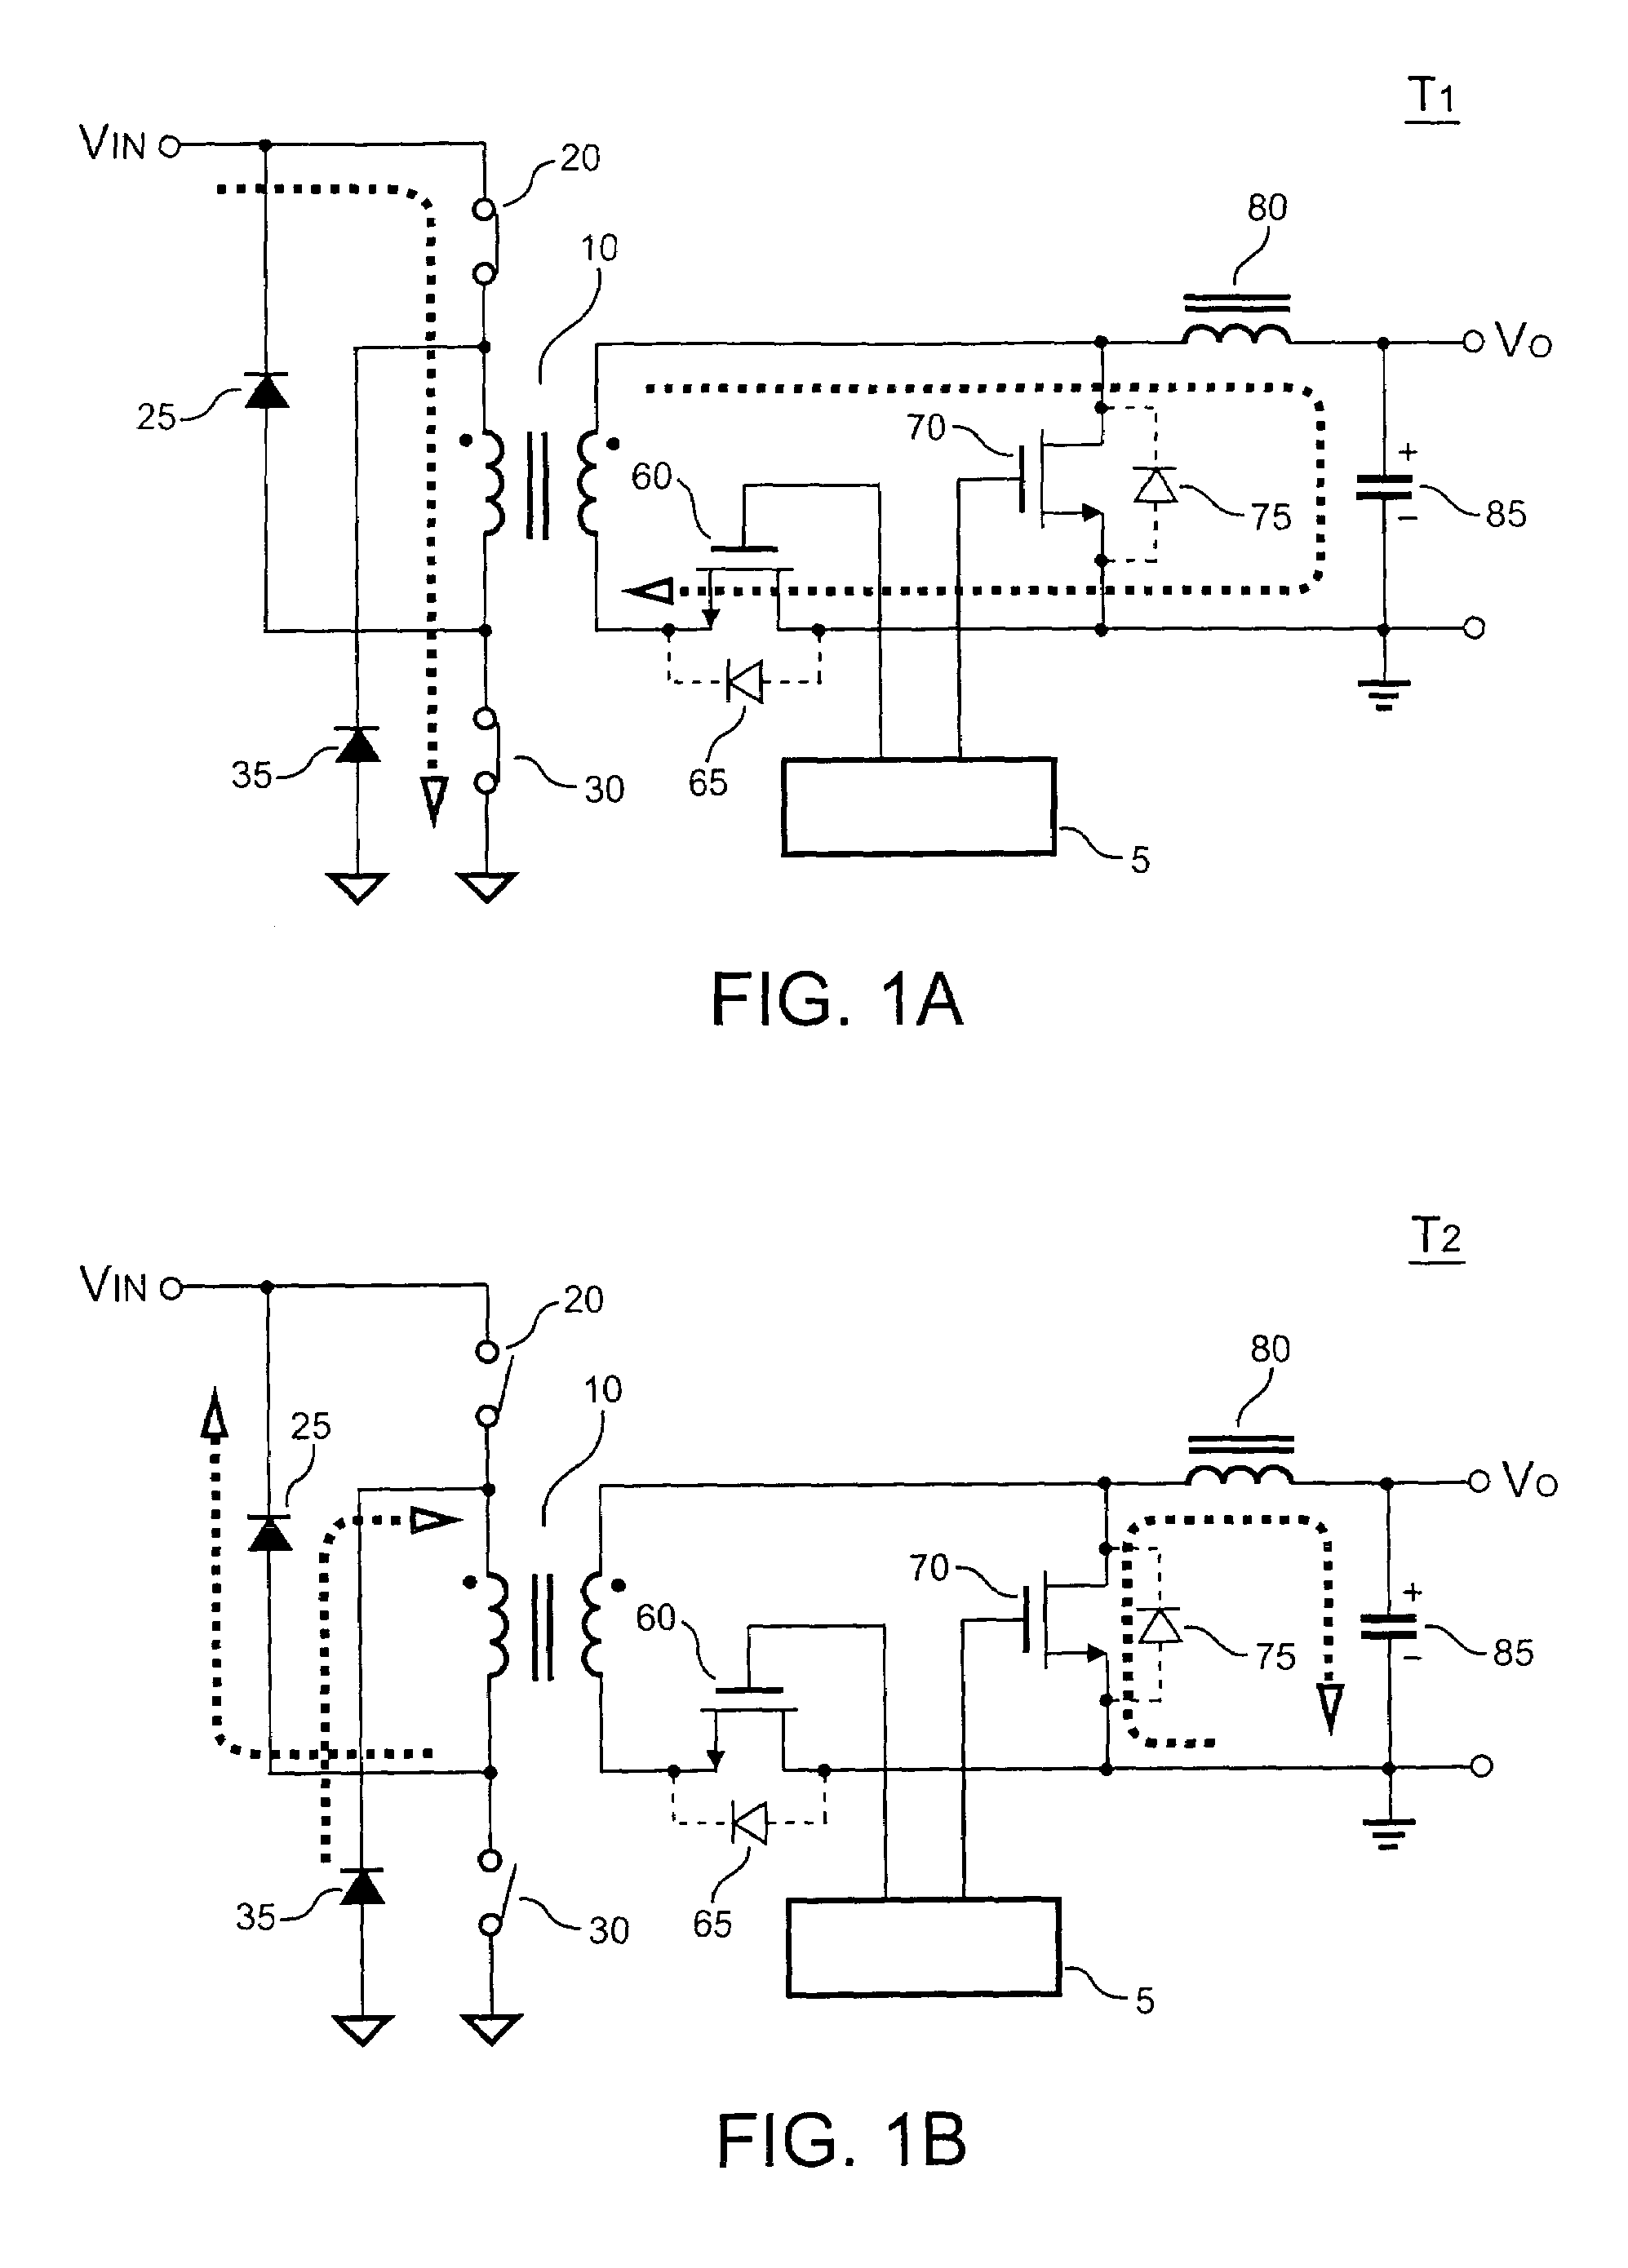 Control circuit associated with saturable inductor operated as synchronous rectifier forward power converter